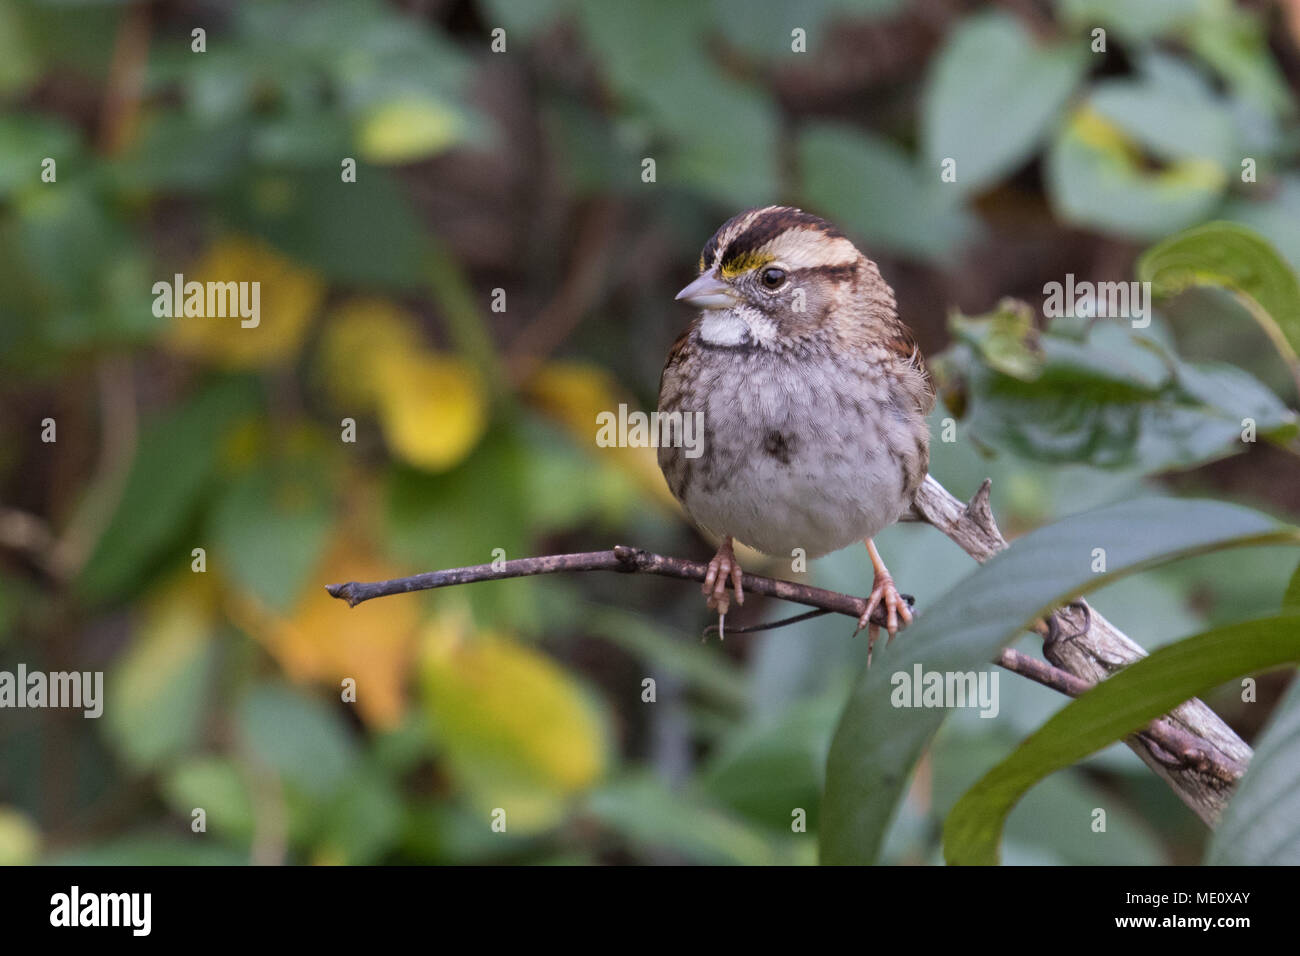 A perched white-throated sparrow. Stock Photo